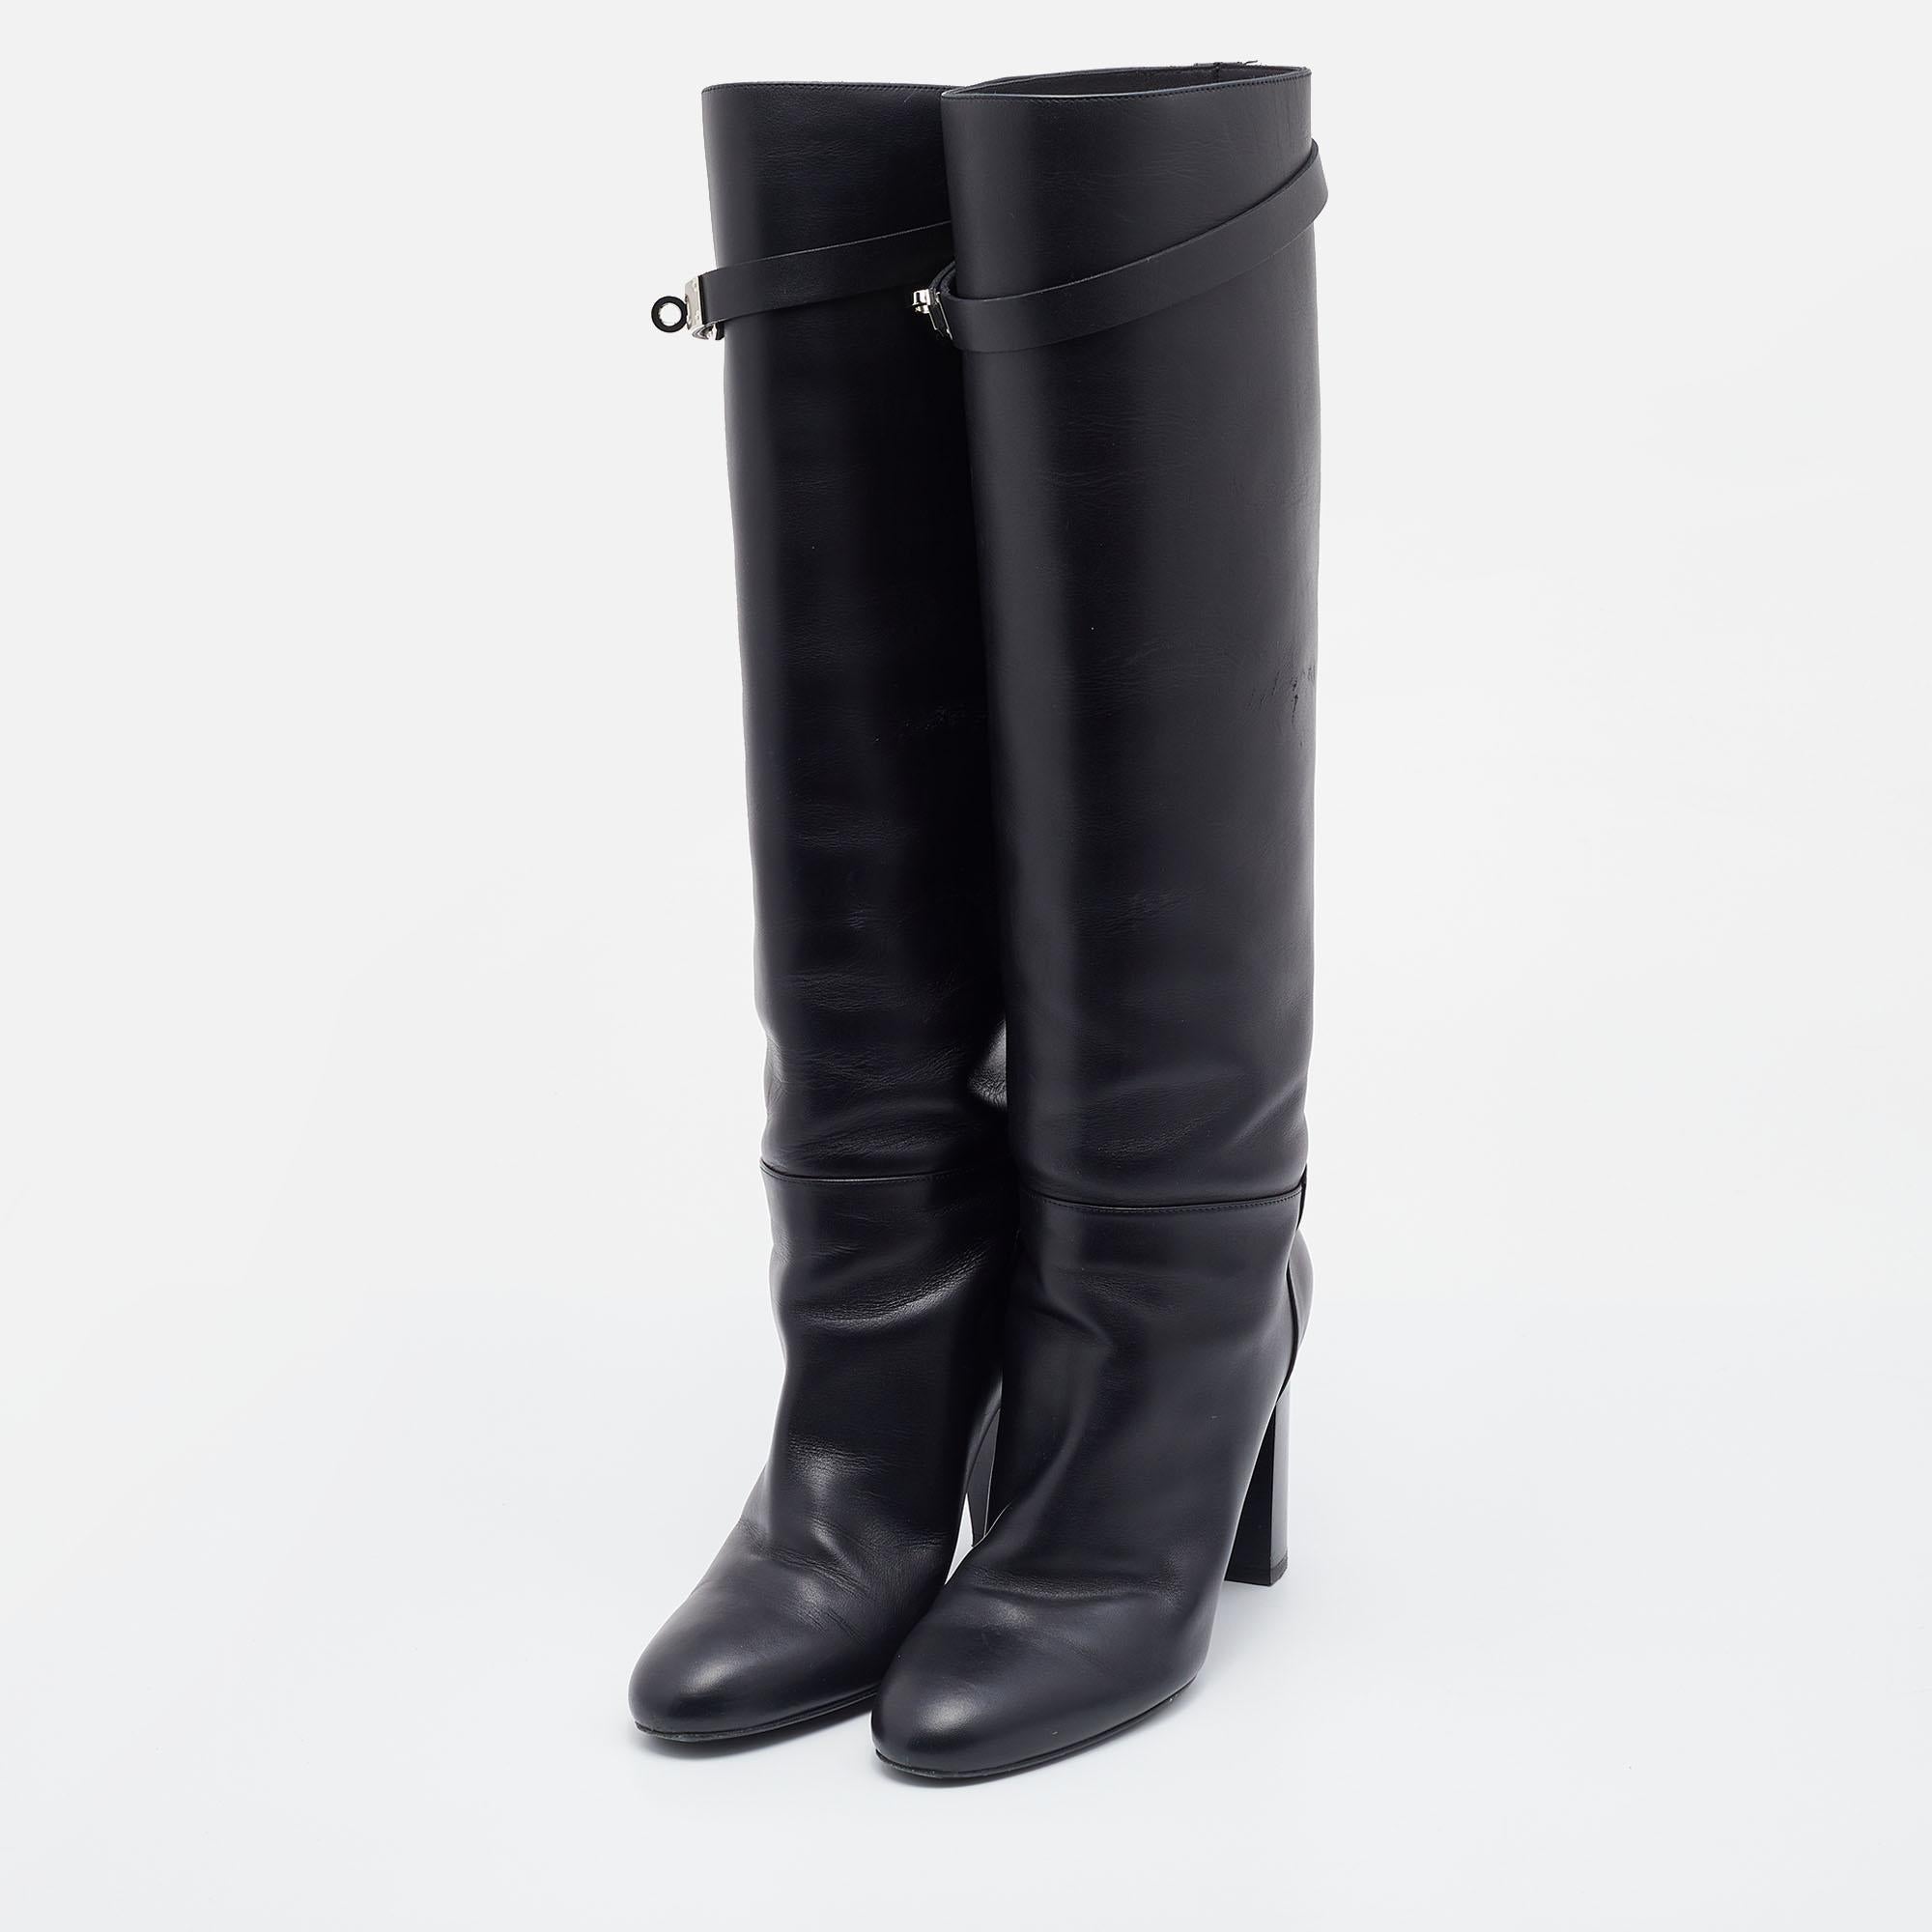 Women's Hermes Black Leather Story Knee Length Boots Size 37.5